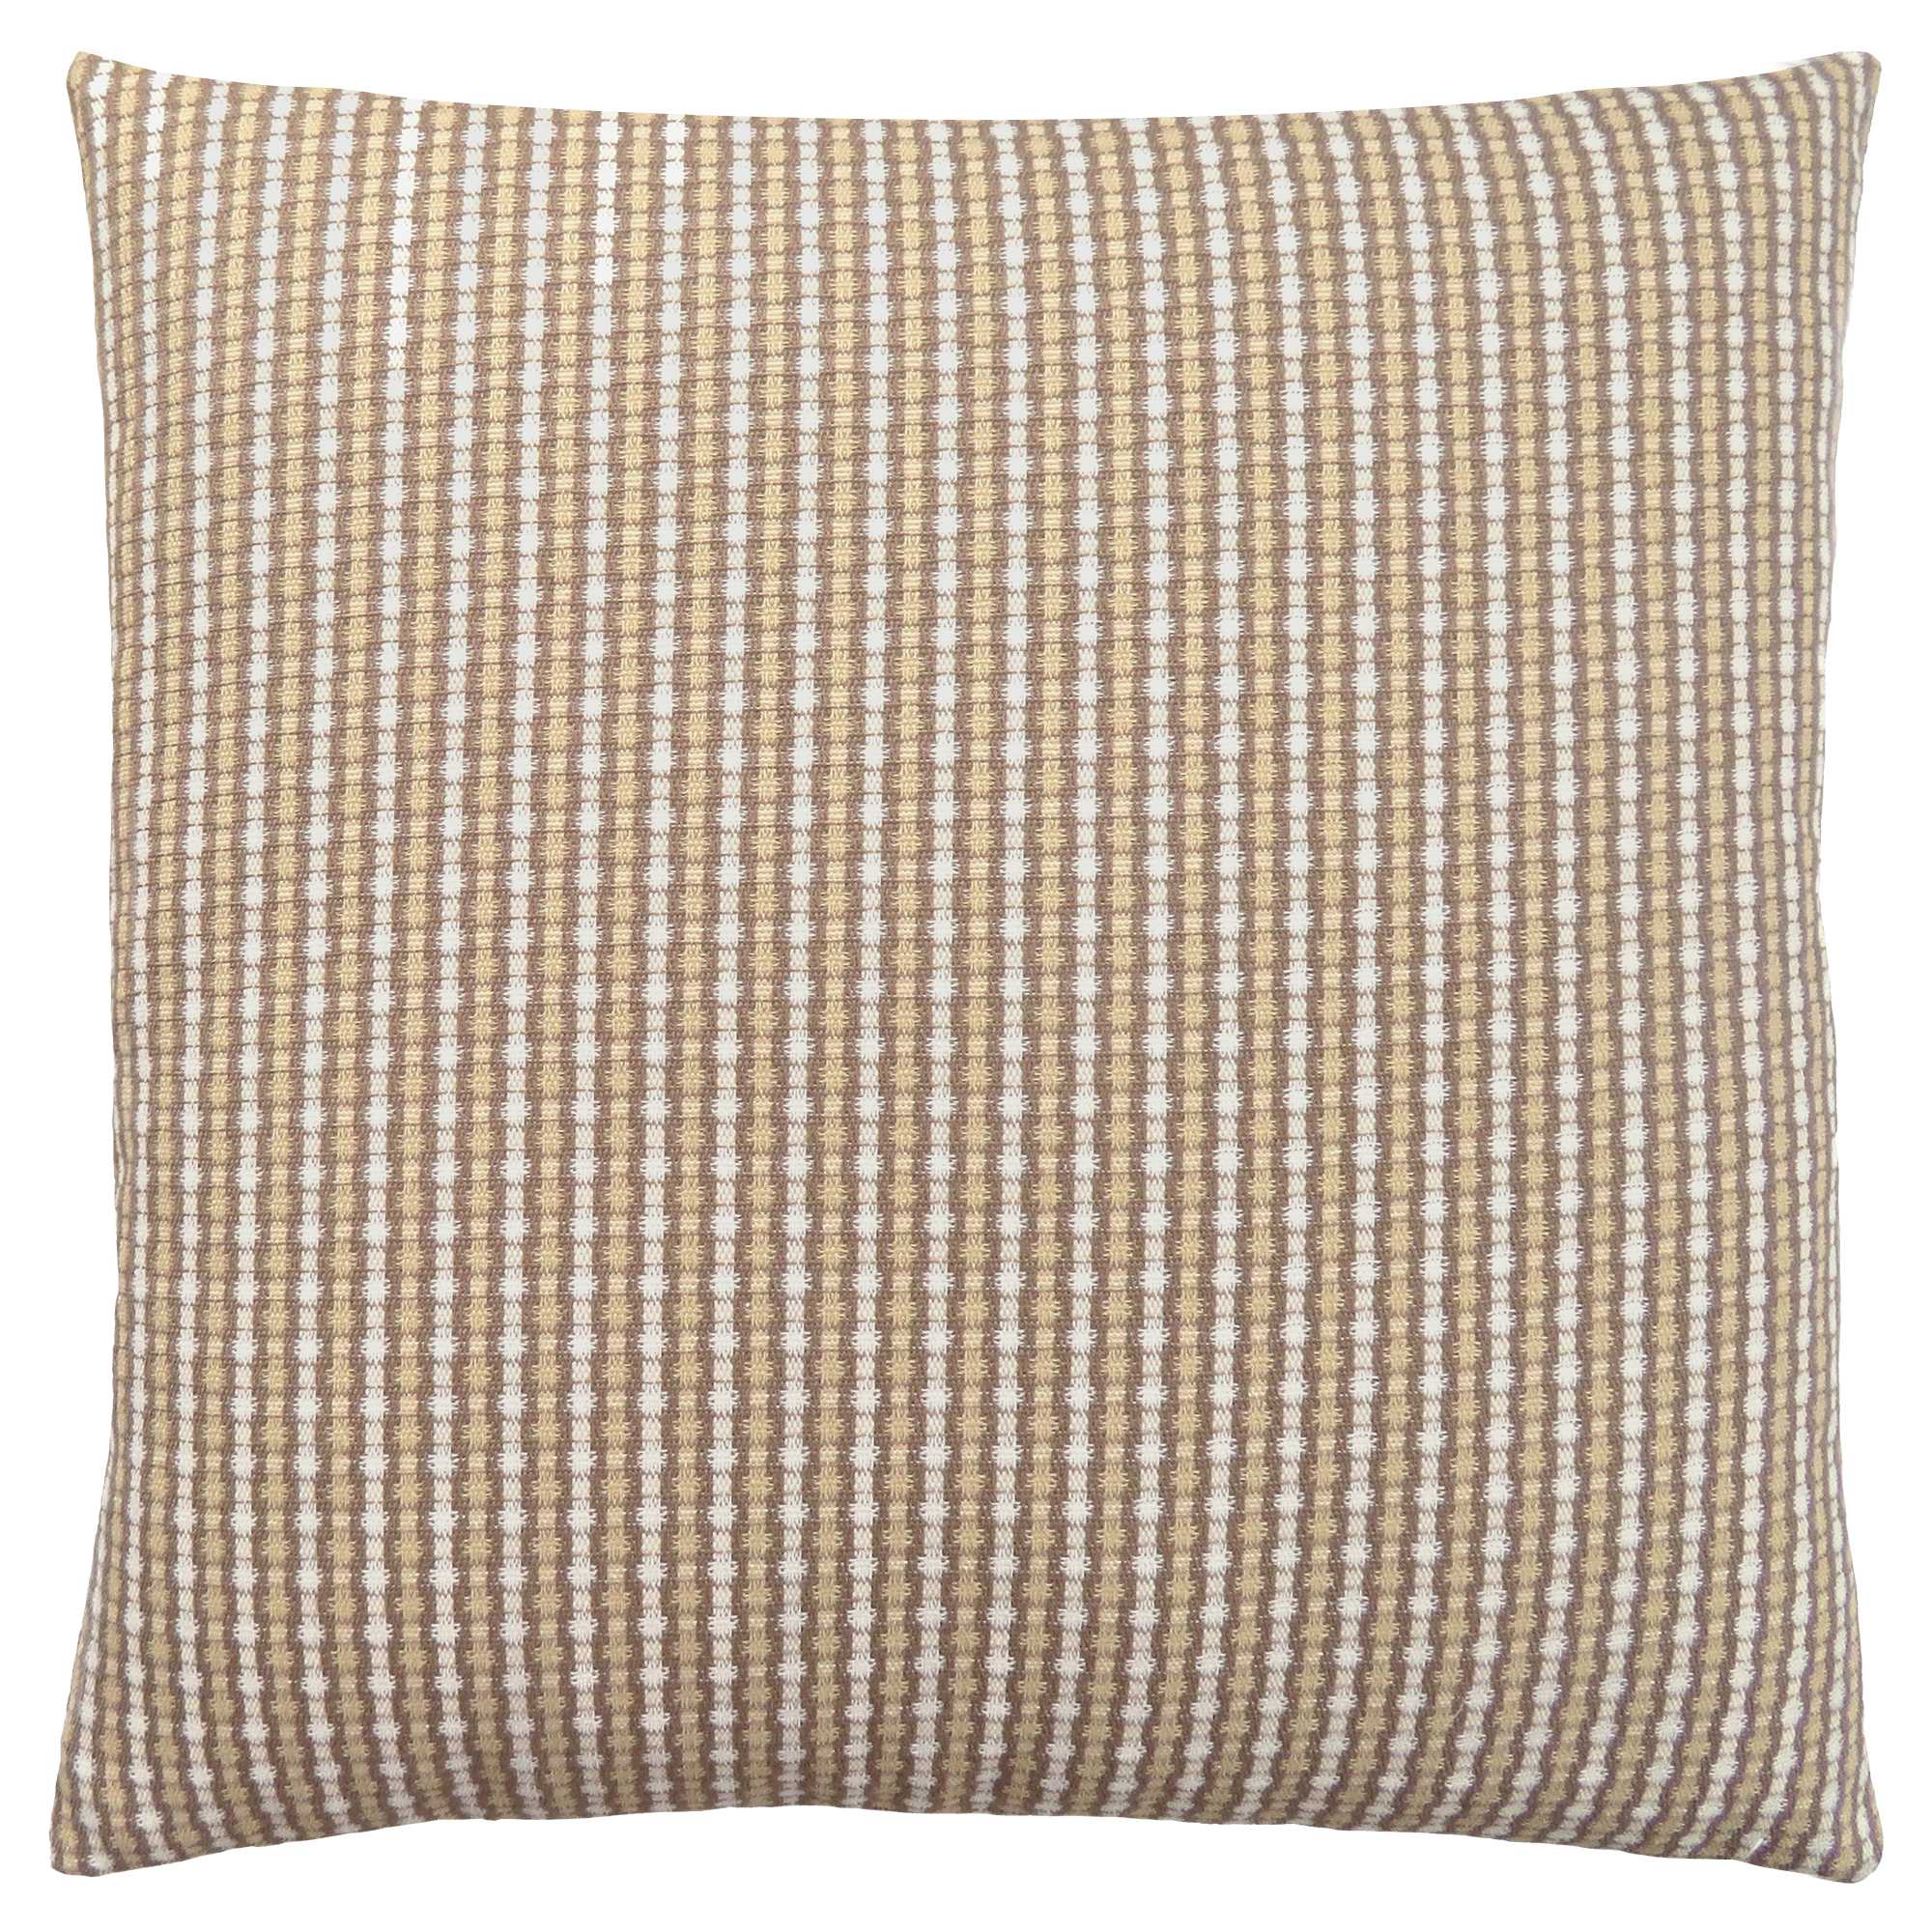 18" X 18" Taupe Polyester Striped Zippered Pillow-344017-1